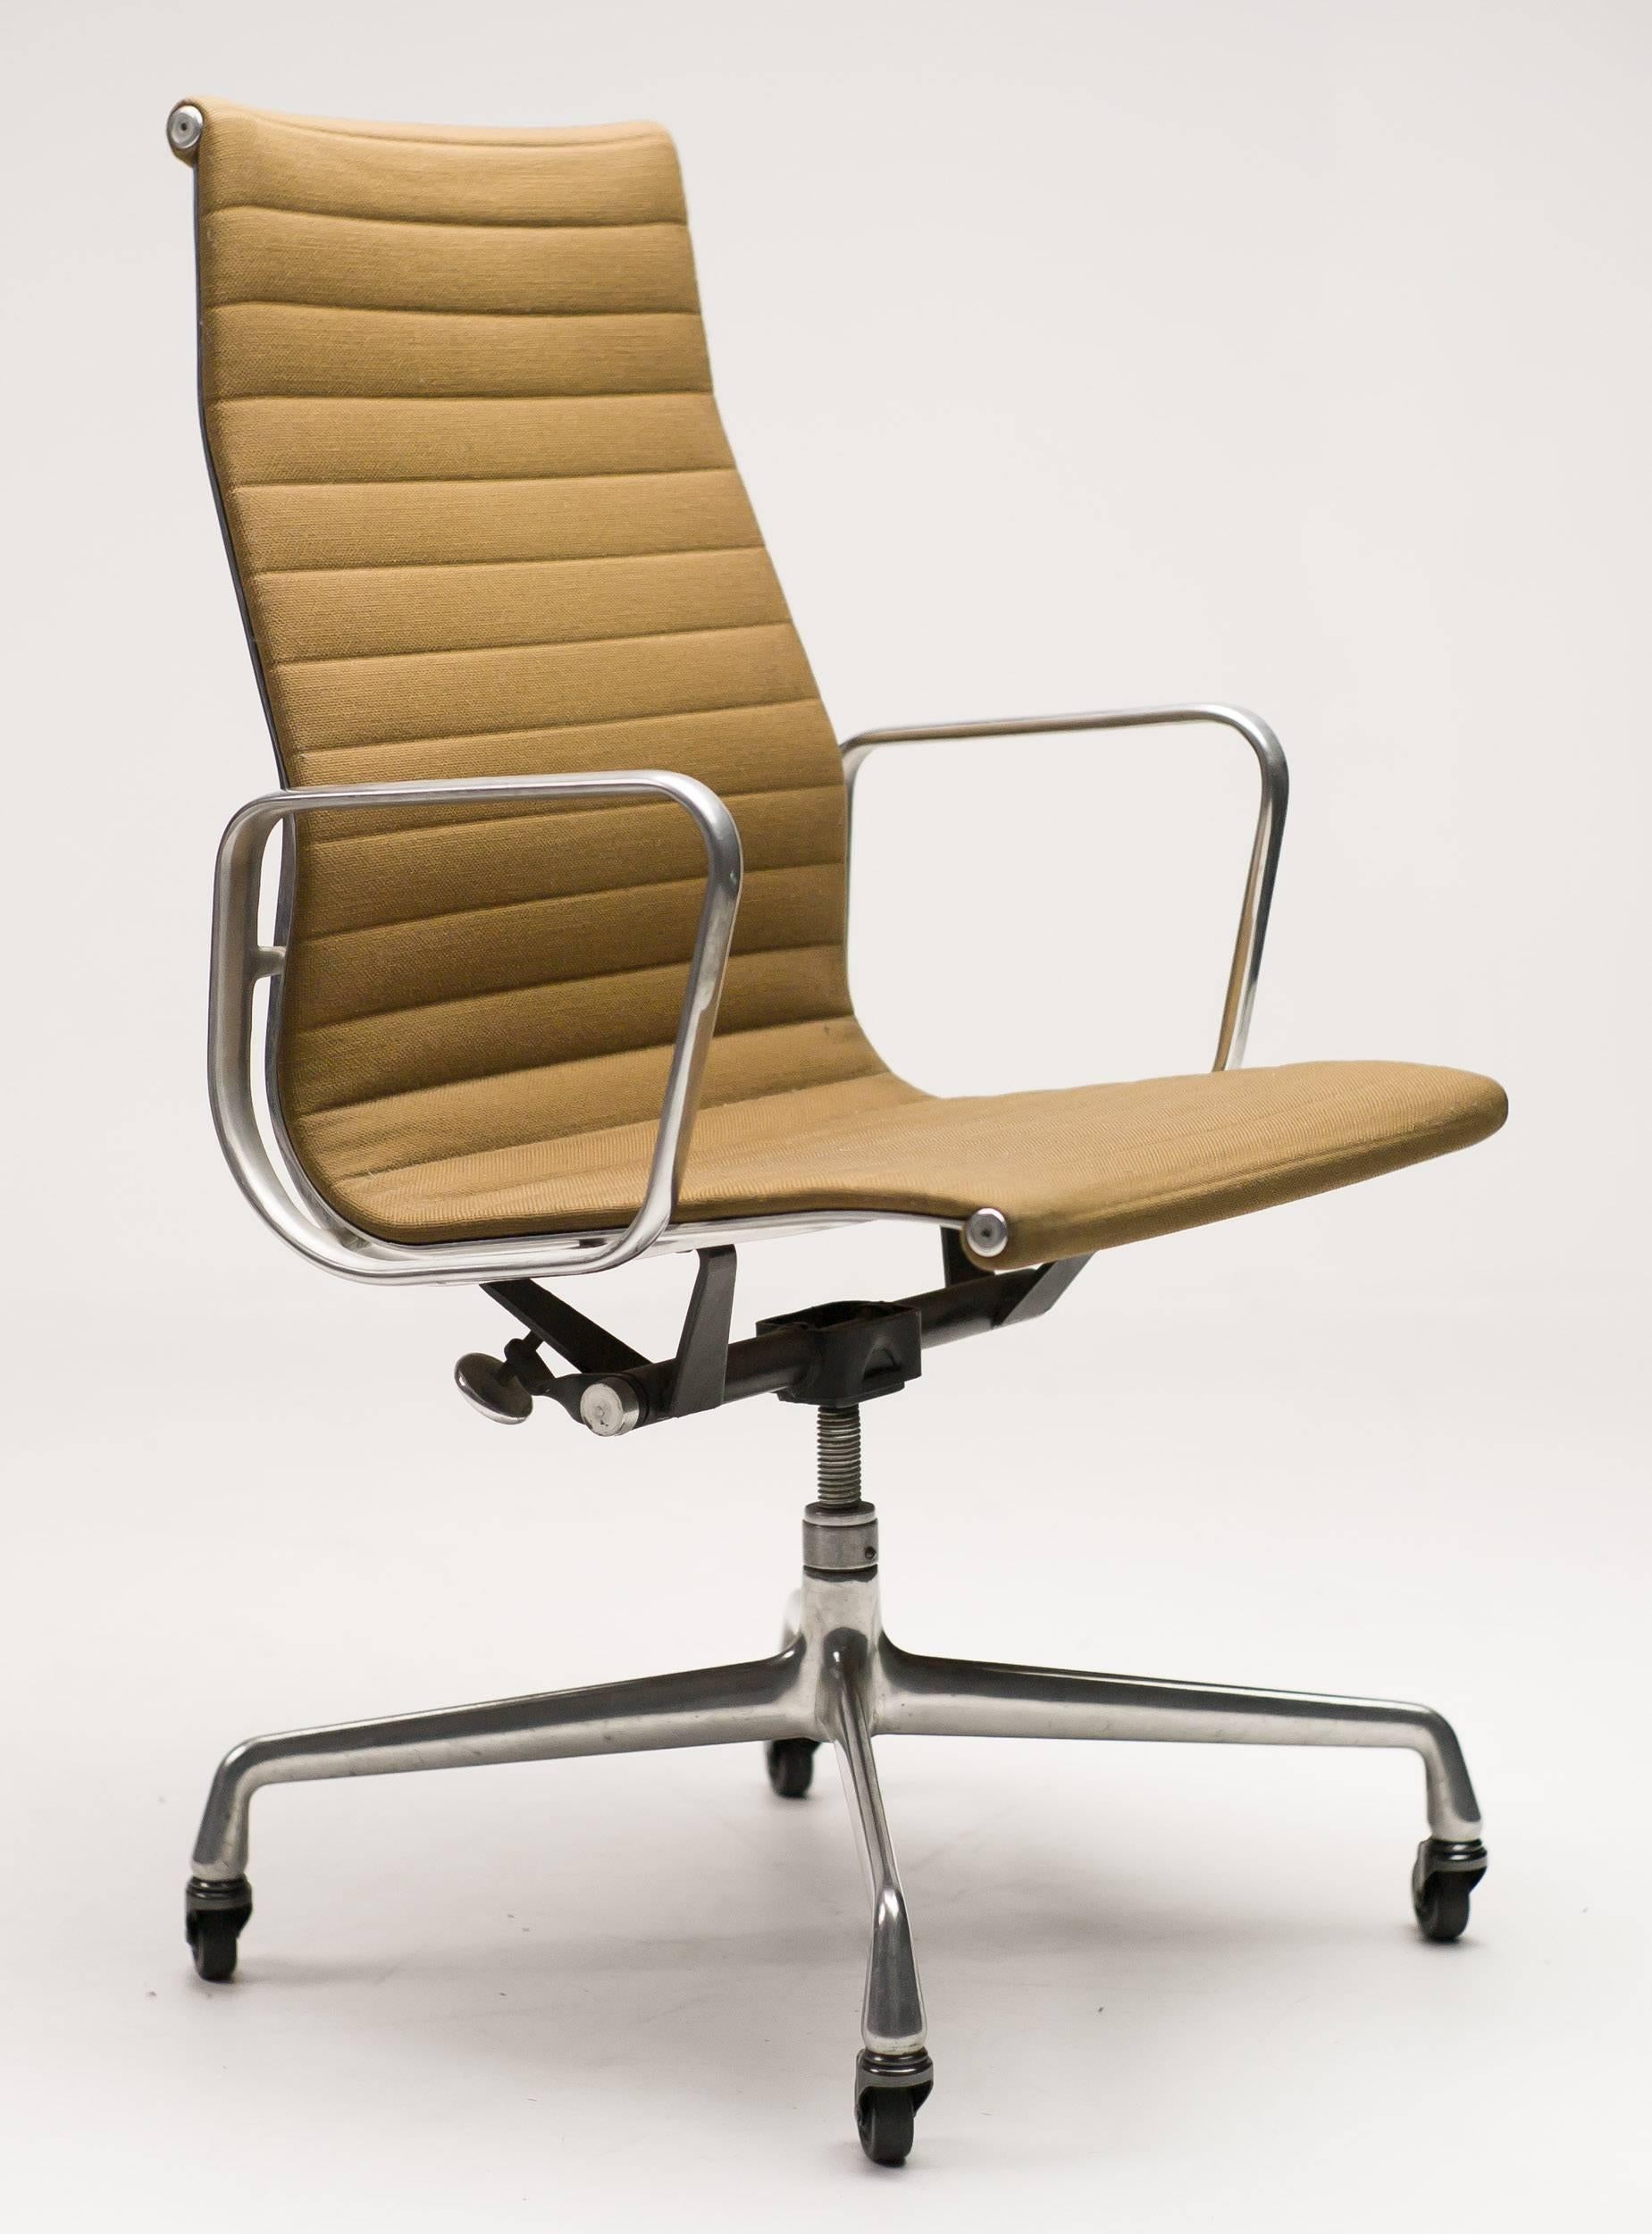 The clean, contemporary Silhouette of this iconic executive desk chair for Herman Miller is a perfect example of Charles & Ray Eames unparalleled designs. In Europe better known as EA119. The four-star aluminium base with casters indicates that